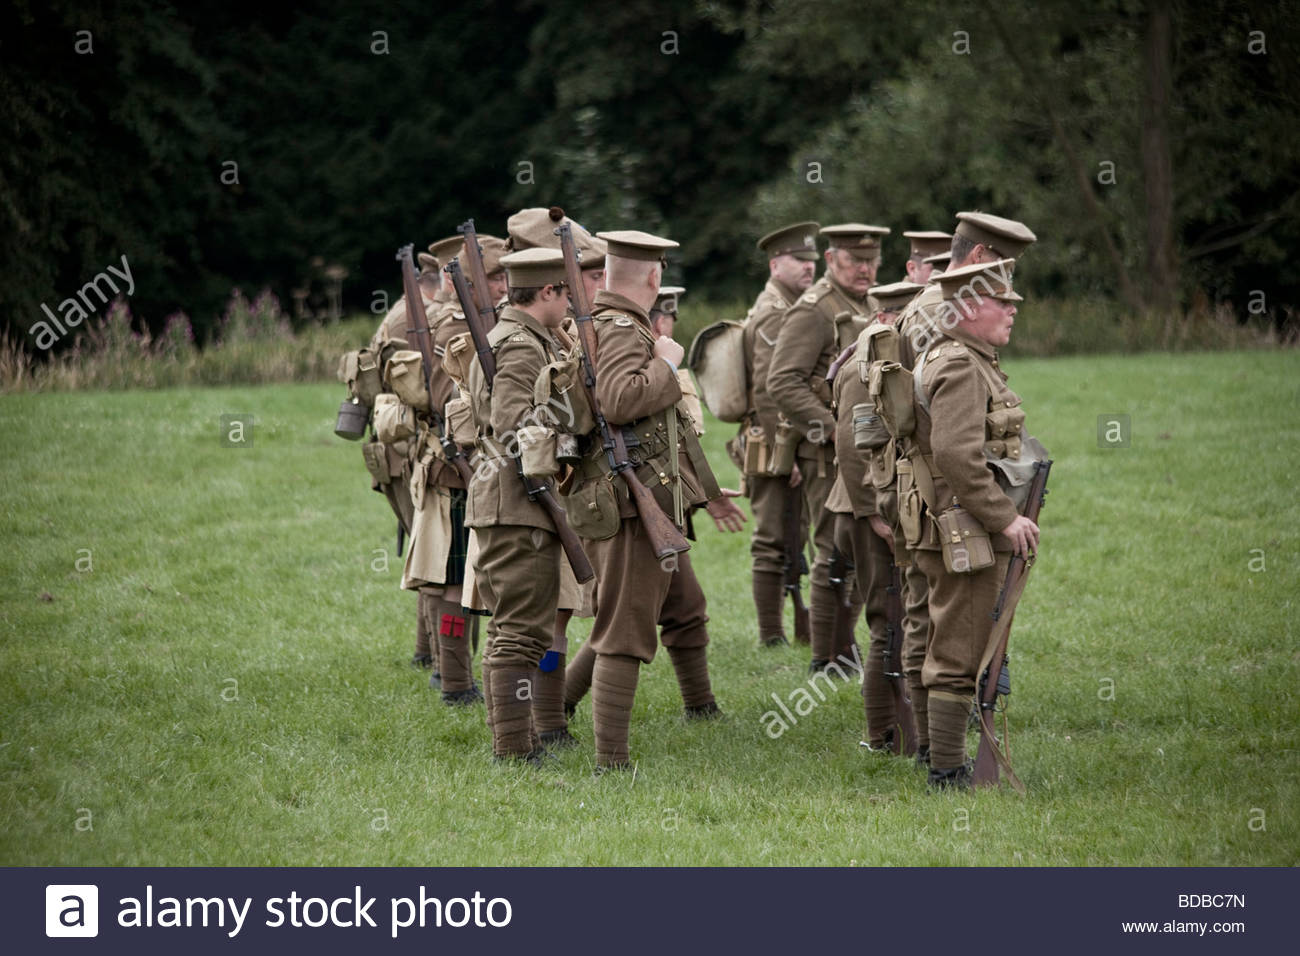 British Soldiers Ww1 Stock Photos & British Soldiers Ww1 Stock Images ...